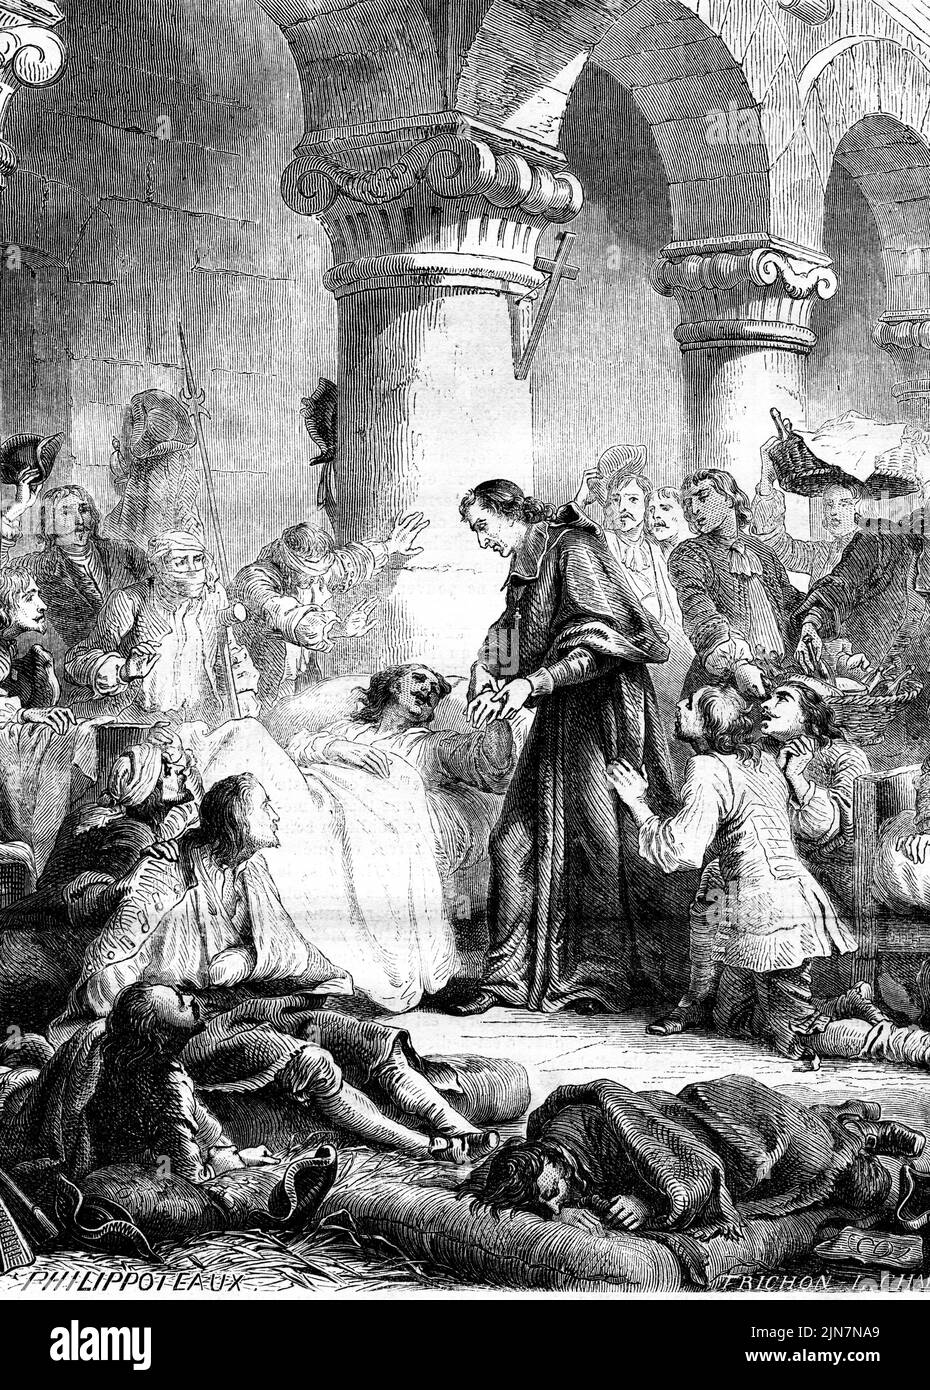 Engraving of Archbishop François de Salignac de la Mothe-Fénelon tending to the French wounded after The Battle of Malplaquet. The battle took place on 11 September 1709 during the War of the Spanish Succession between a French army commanded by the Duke of Villars and a Grand Alliance force under the Duke of Marlborough. Stock Photo